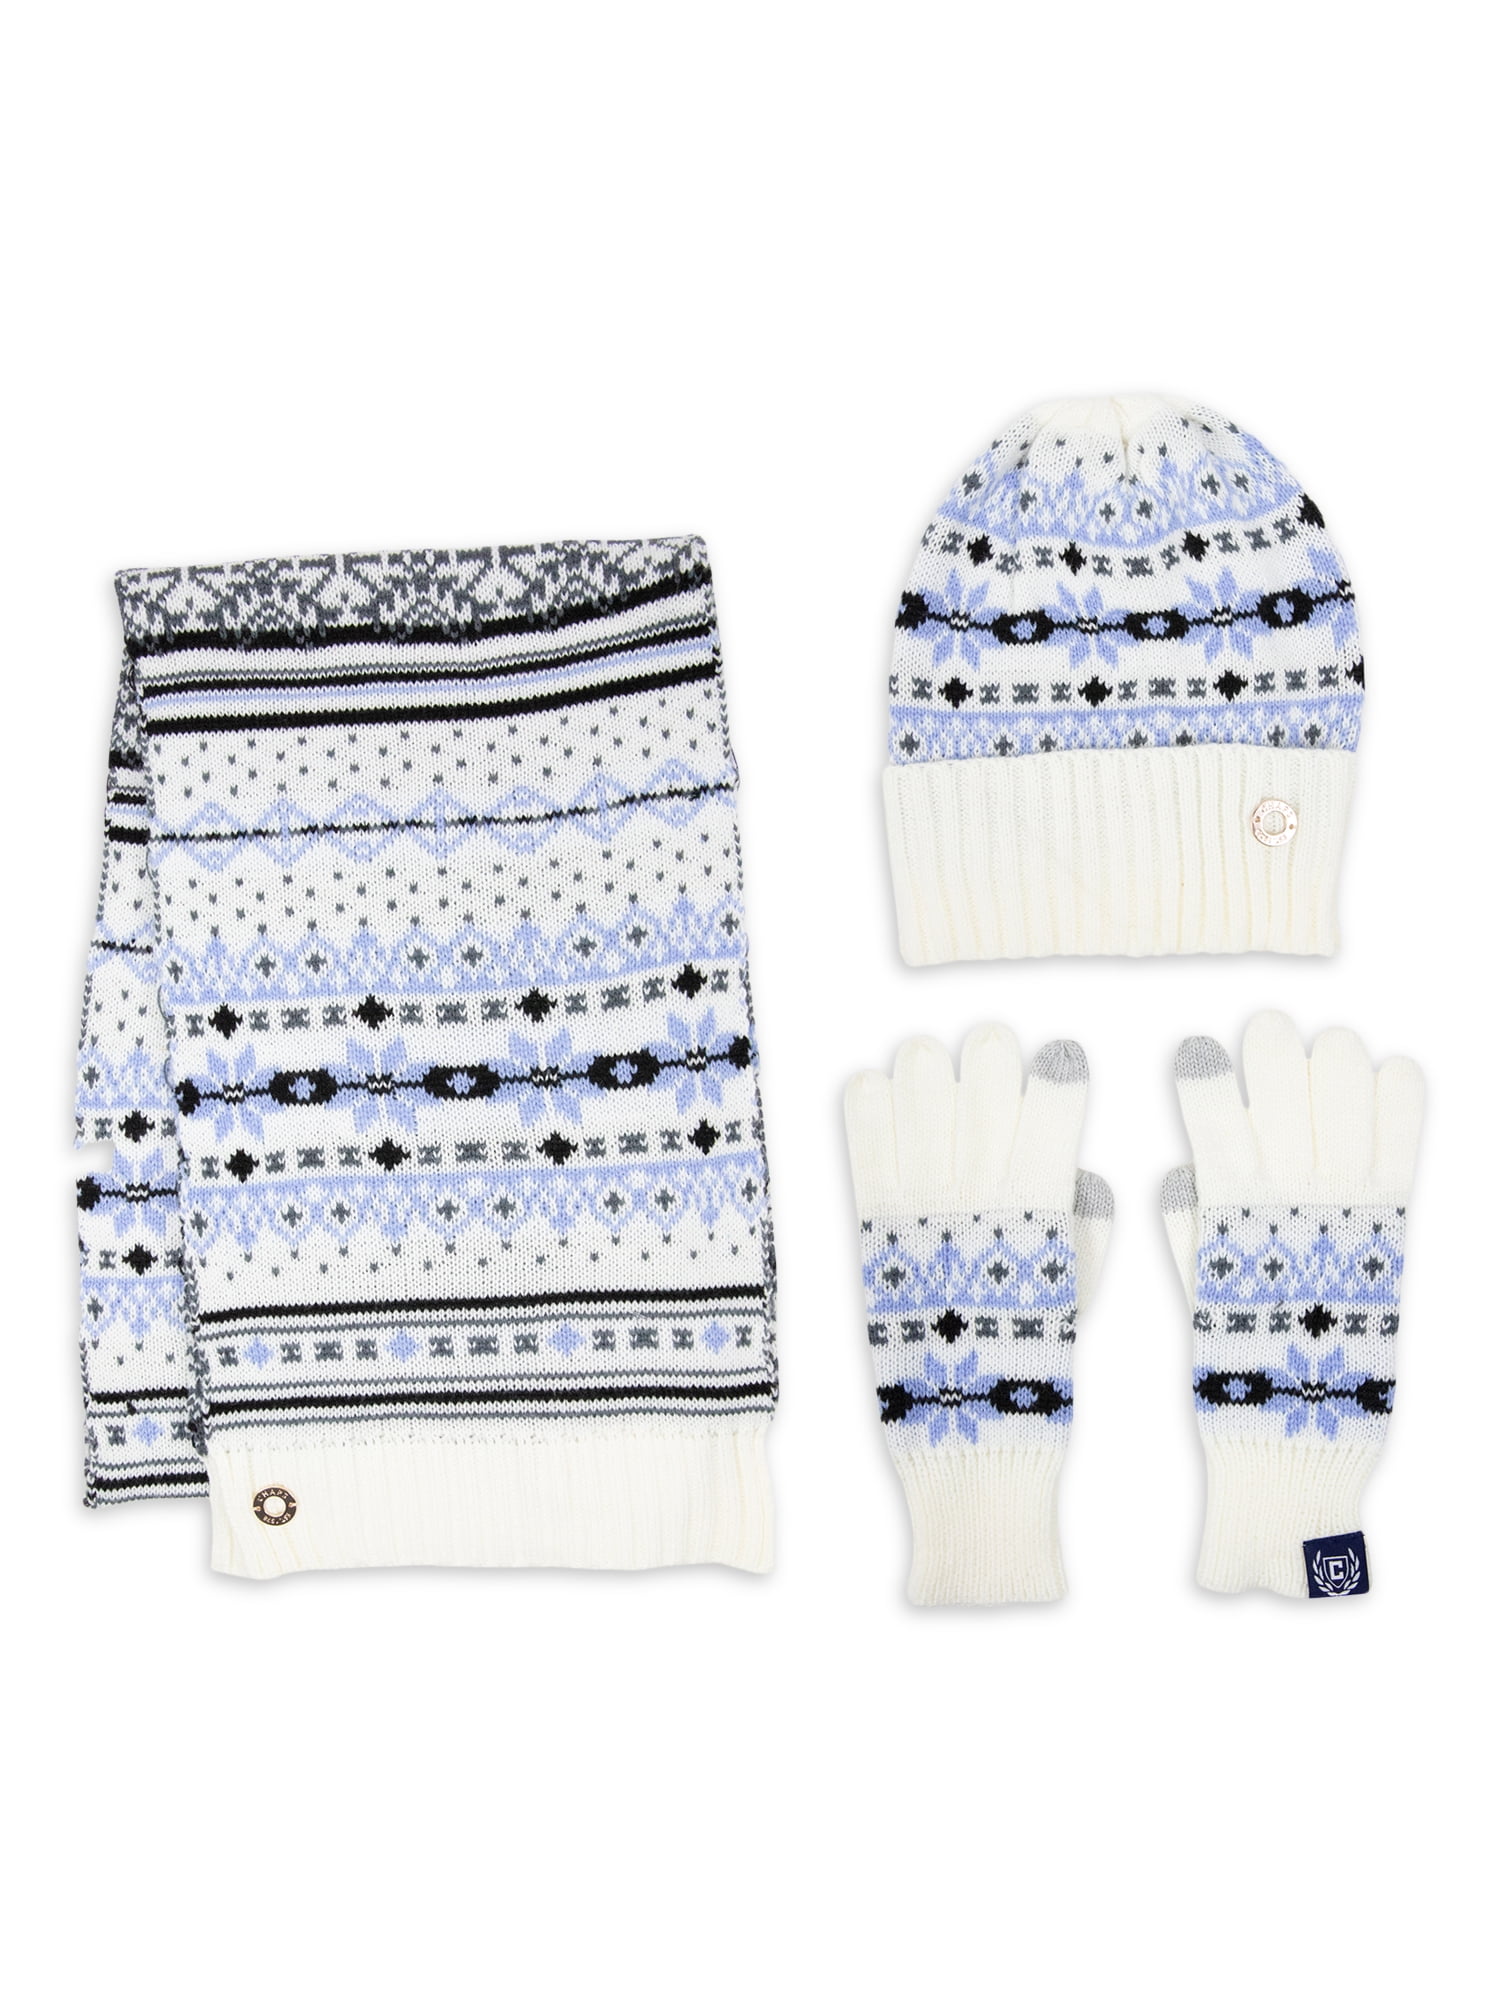 Chaps Brand Women\'s Fairisle Knit 3 Piece Scarf, Beanie Style Hat and Glove  Set, Adult